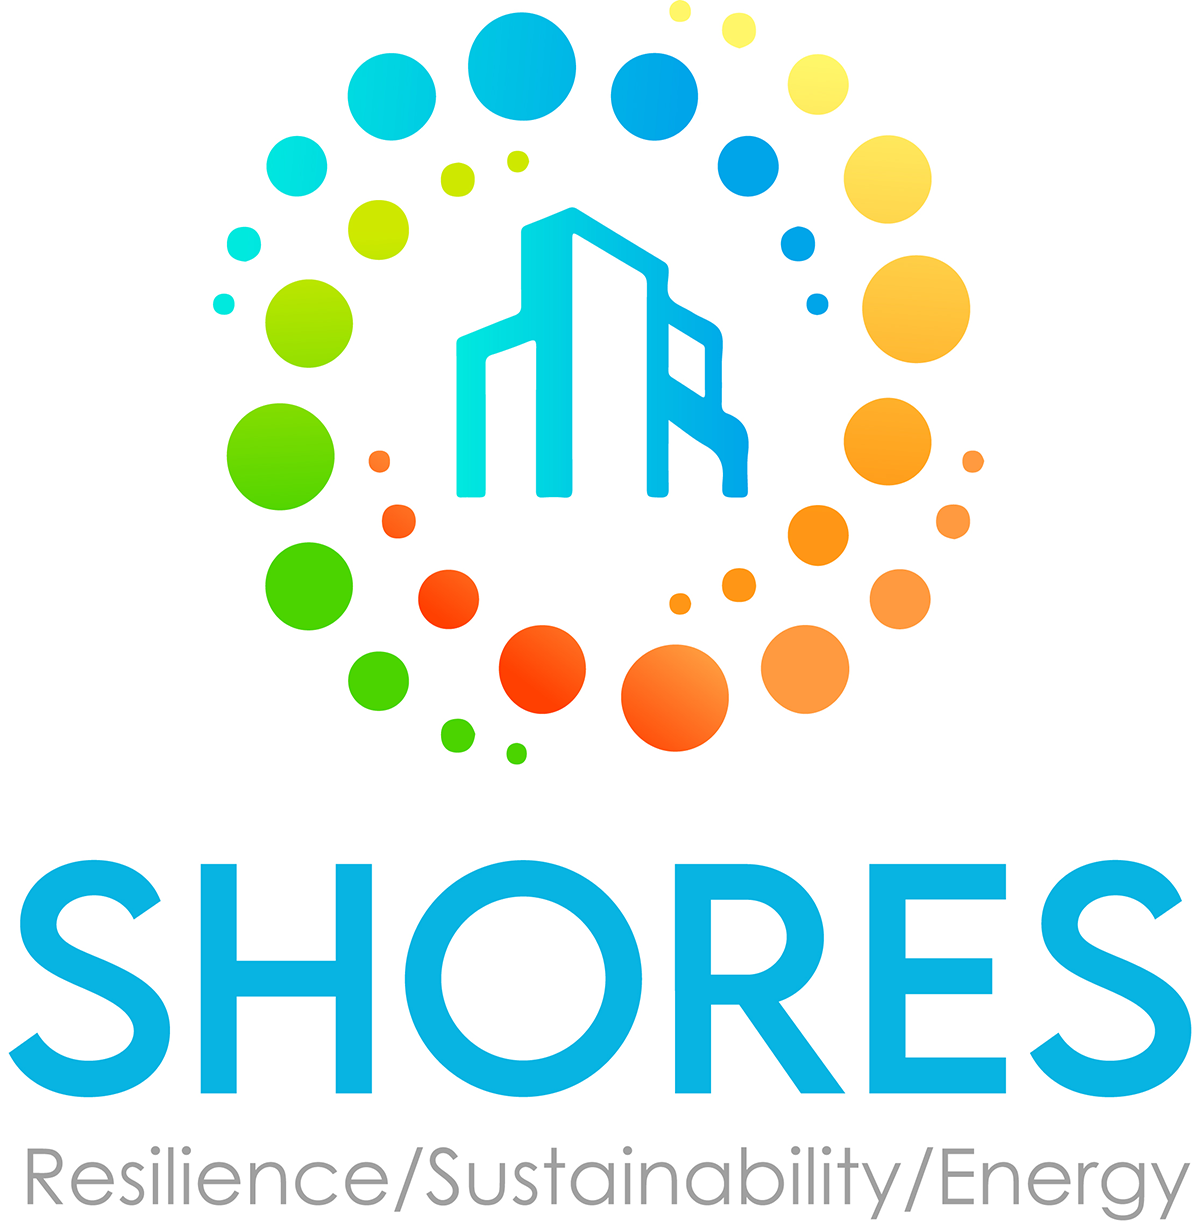 Sand Hazards & Opportunities for Resilience, Energy, & Sustainability (SHORES): Resilience / Sustainability / Energy